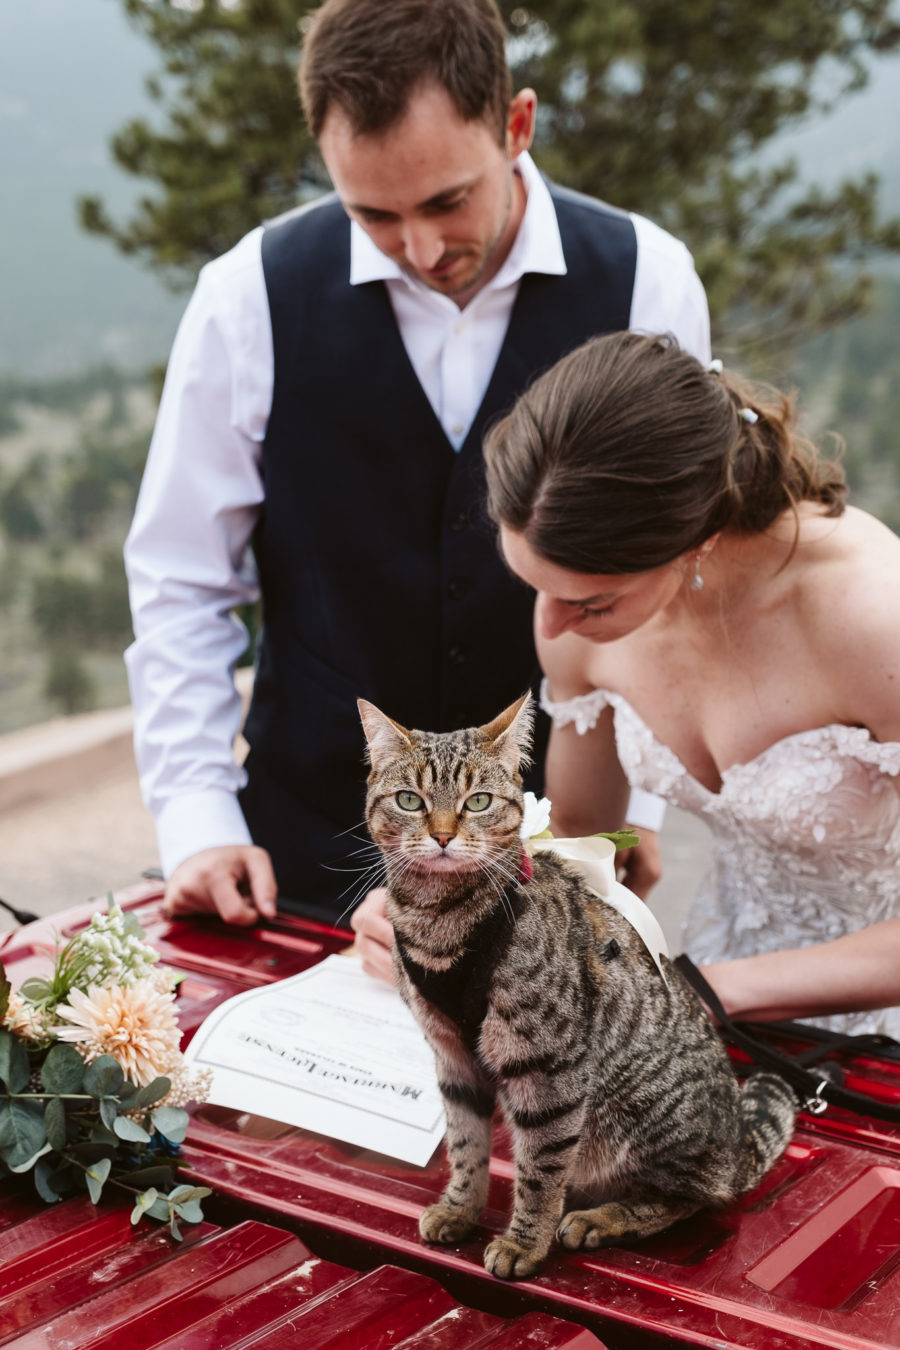 Self-solemnized elopement with cat